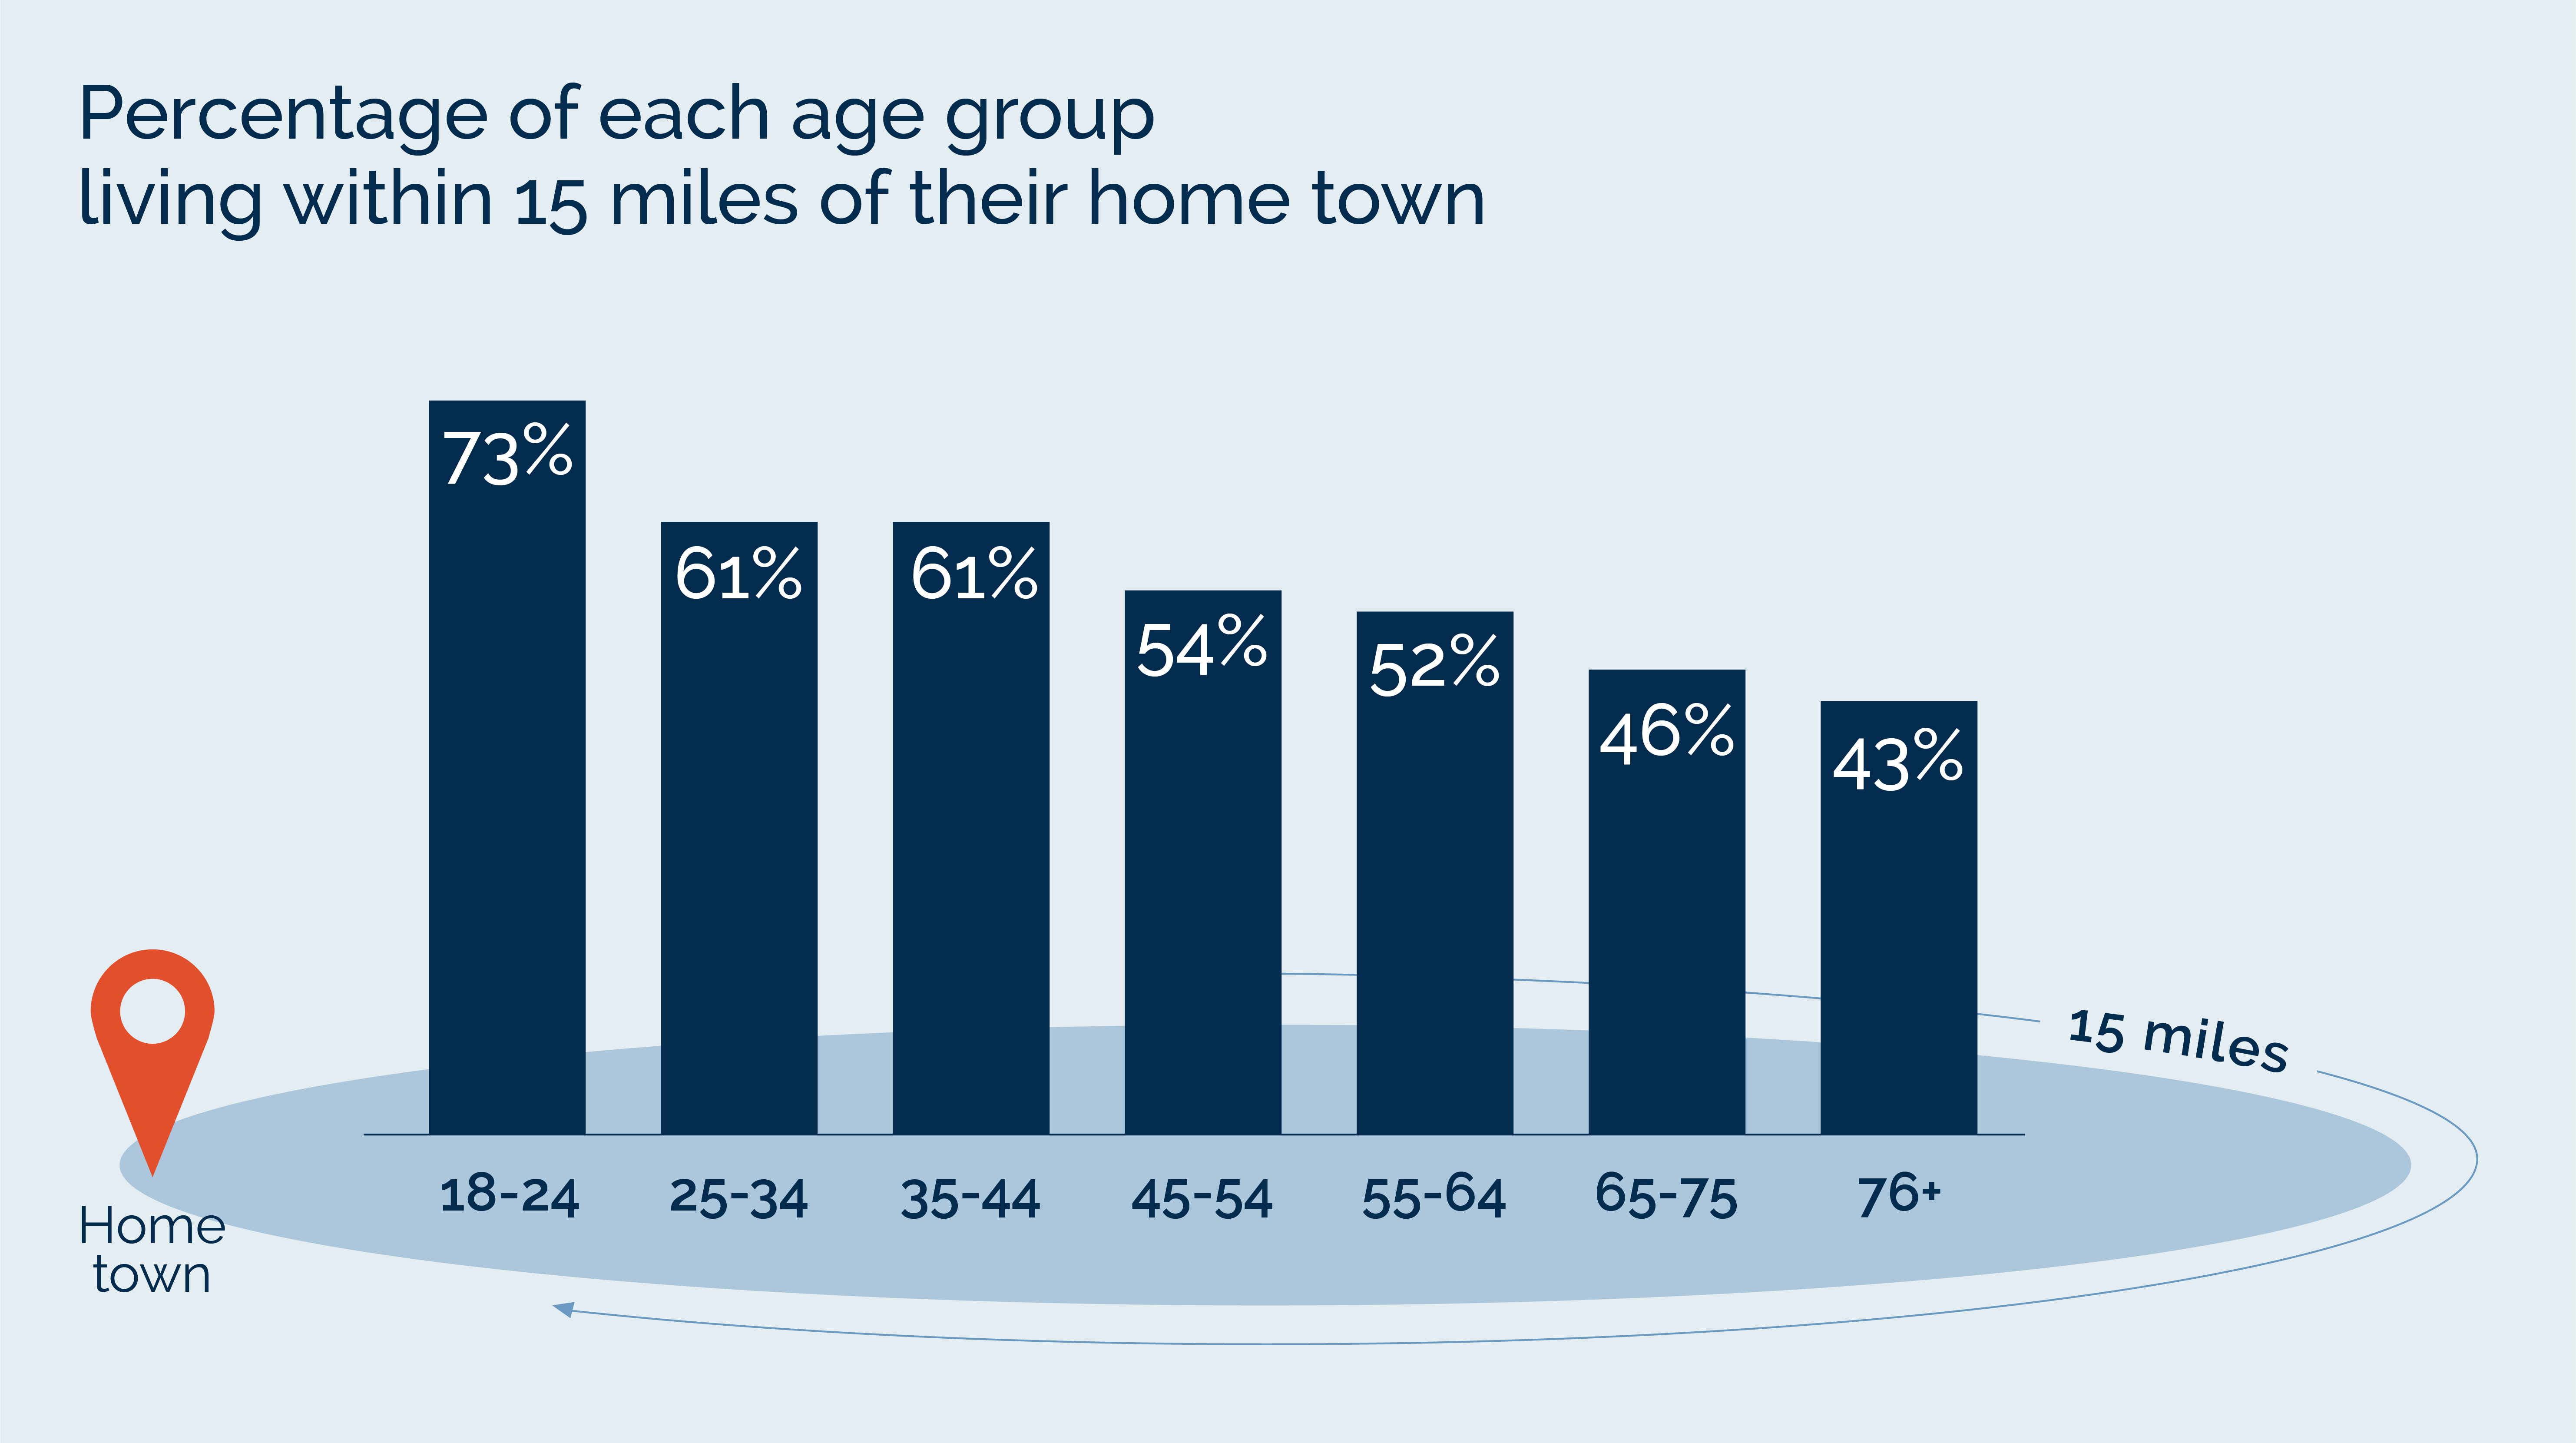 Percentage living with 15 miles of their home town